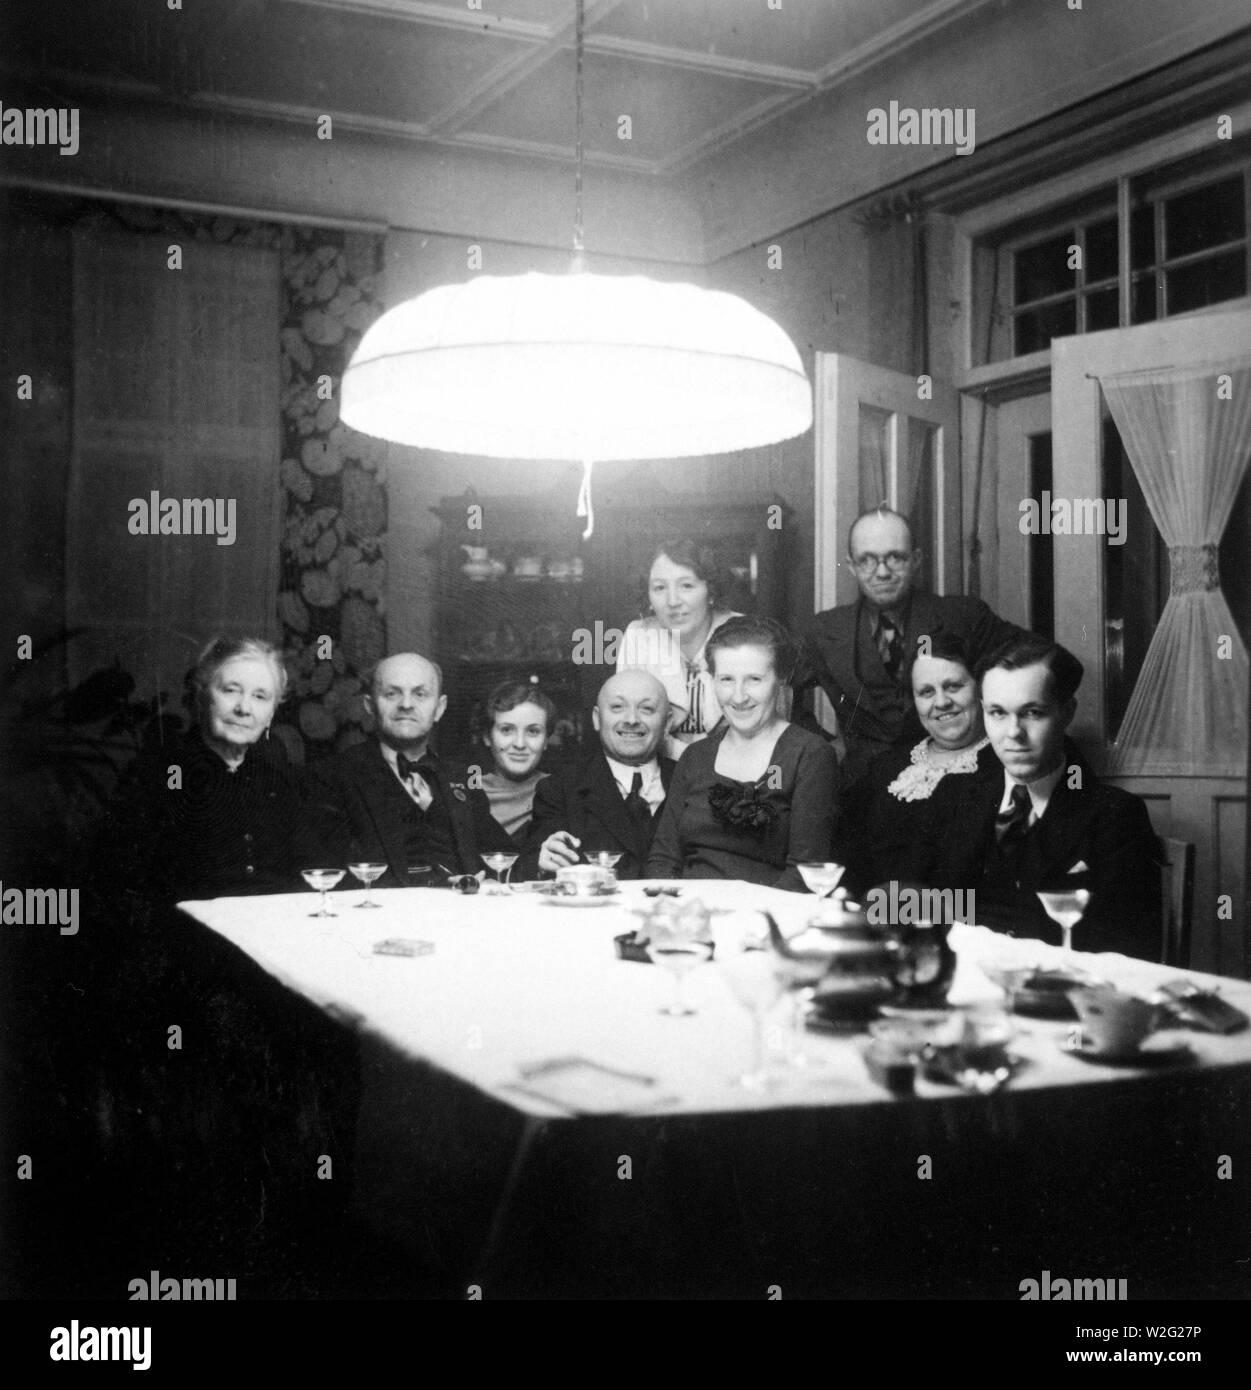 Eva Braun Collection (Album 2) - Family sitting for group portrait at table in what appears to be a dining room Stock Photo